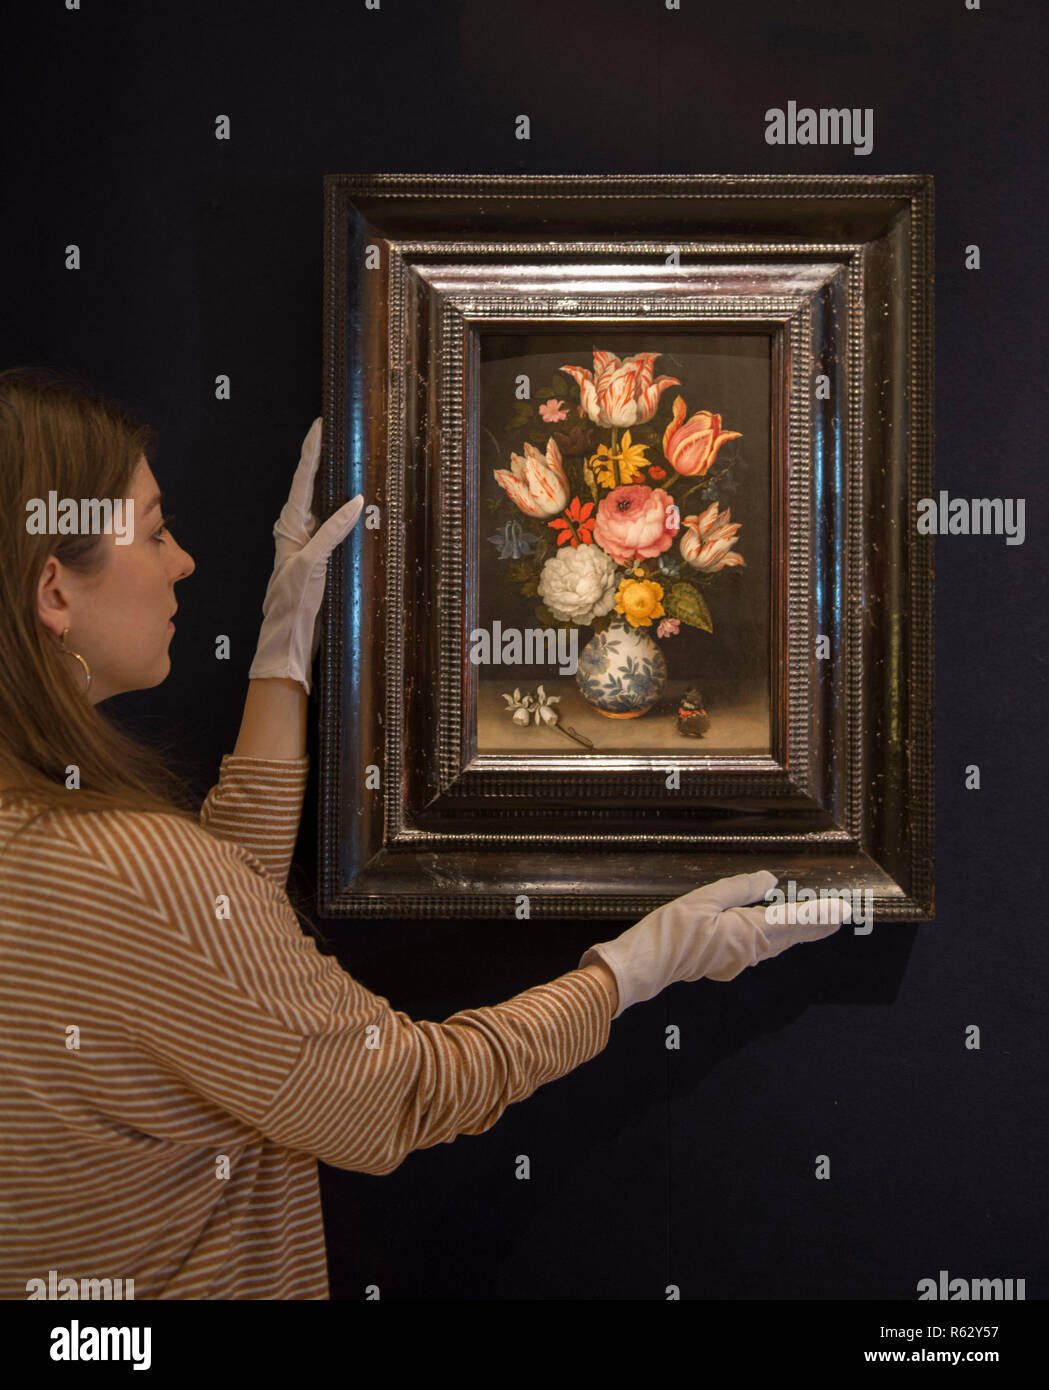 Bonhams, New Bond Street, London, UK. 3 December 2018. Bonhams Old Masters preview, image: A still life of a porcelain vase holding a floral bouquet by Ambrosius Bosschaert the Elder (1573-1621). It has been dated to 1609/10 by the leading specialist in Dutch and Flemish 17th century still-life painting, Dr Fred Meijer. It was Dr Meijer who, in 2001, first identified the painting as the work of Bosschaert the Elder. Estimate: £400,000-600,000. The sale takes place on 5th December 2018. Credit: Malcolm Park/Alamy Live News. Stock Photo